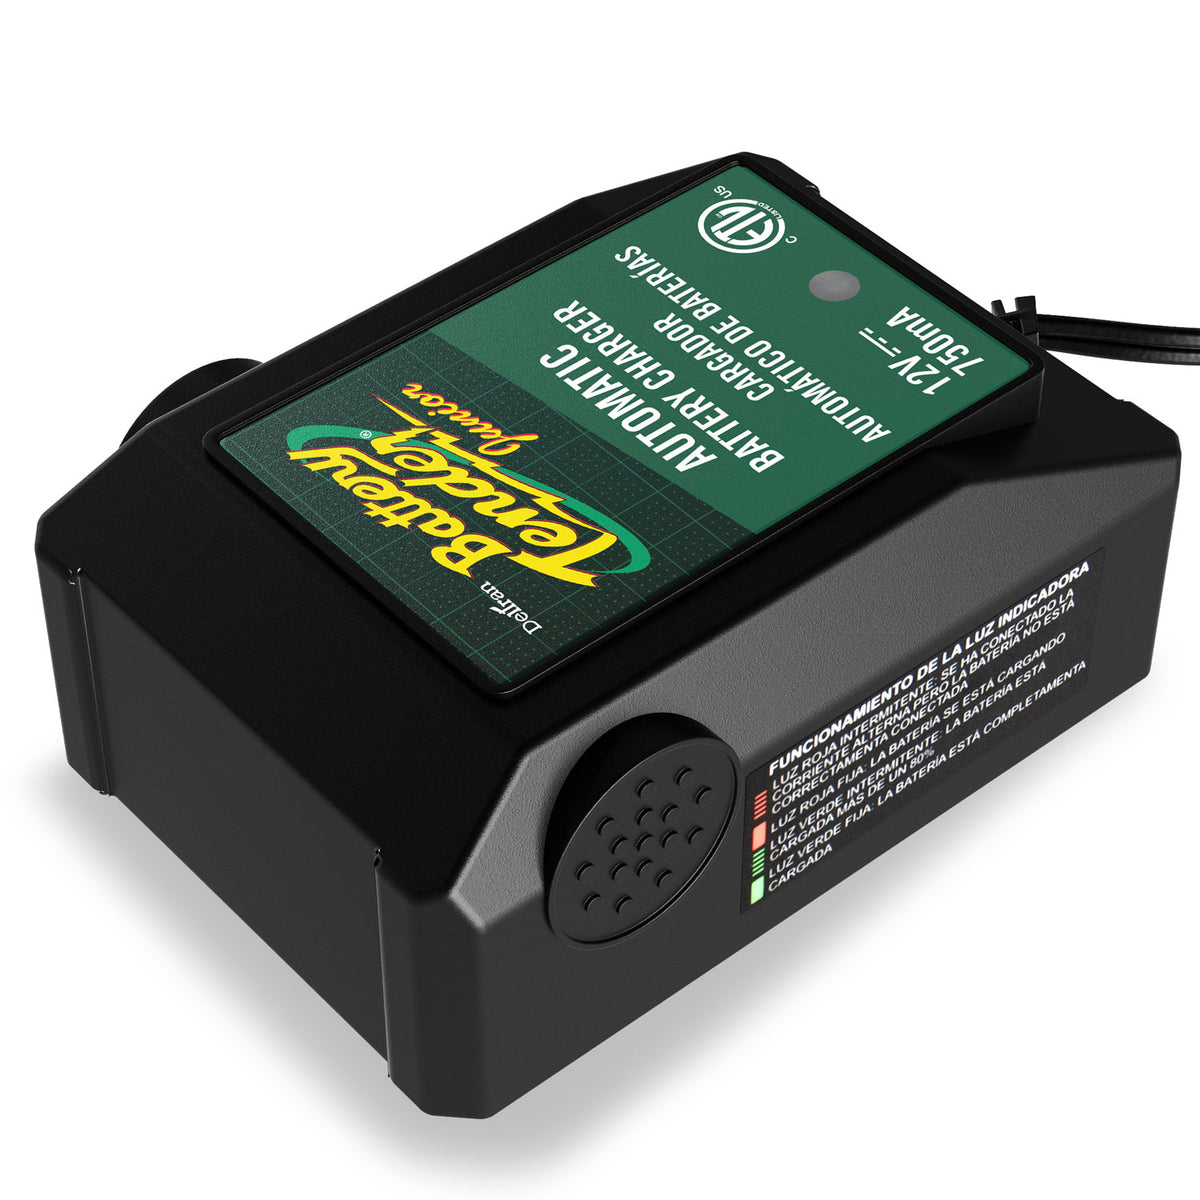 Deltran Battery Tender 021-0123 Automatic Battery Charger & Maintainer, 12V, 750mA